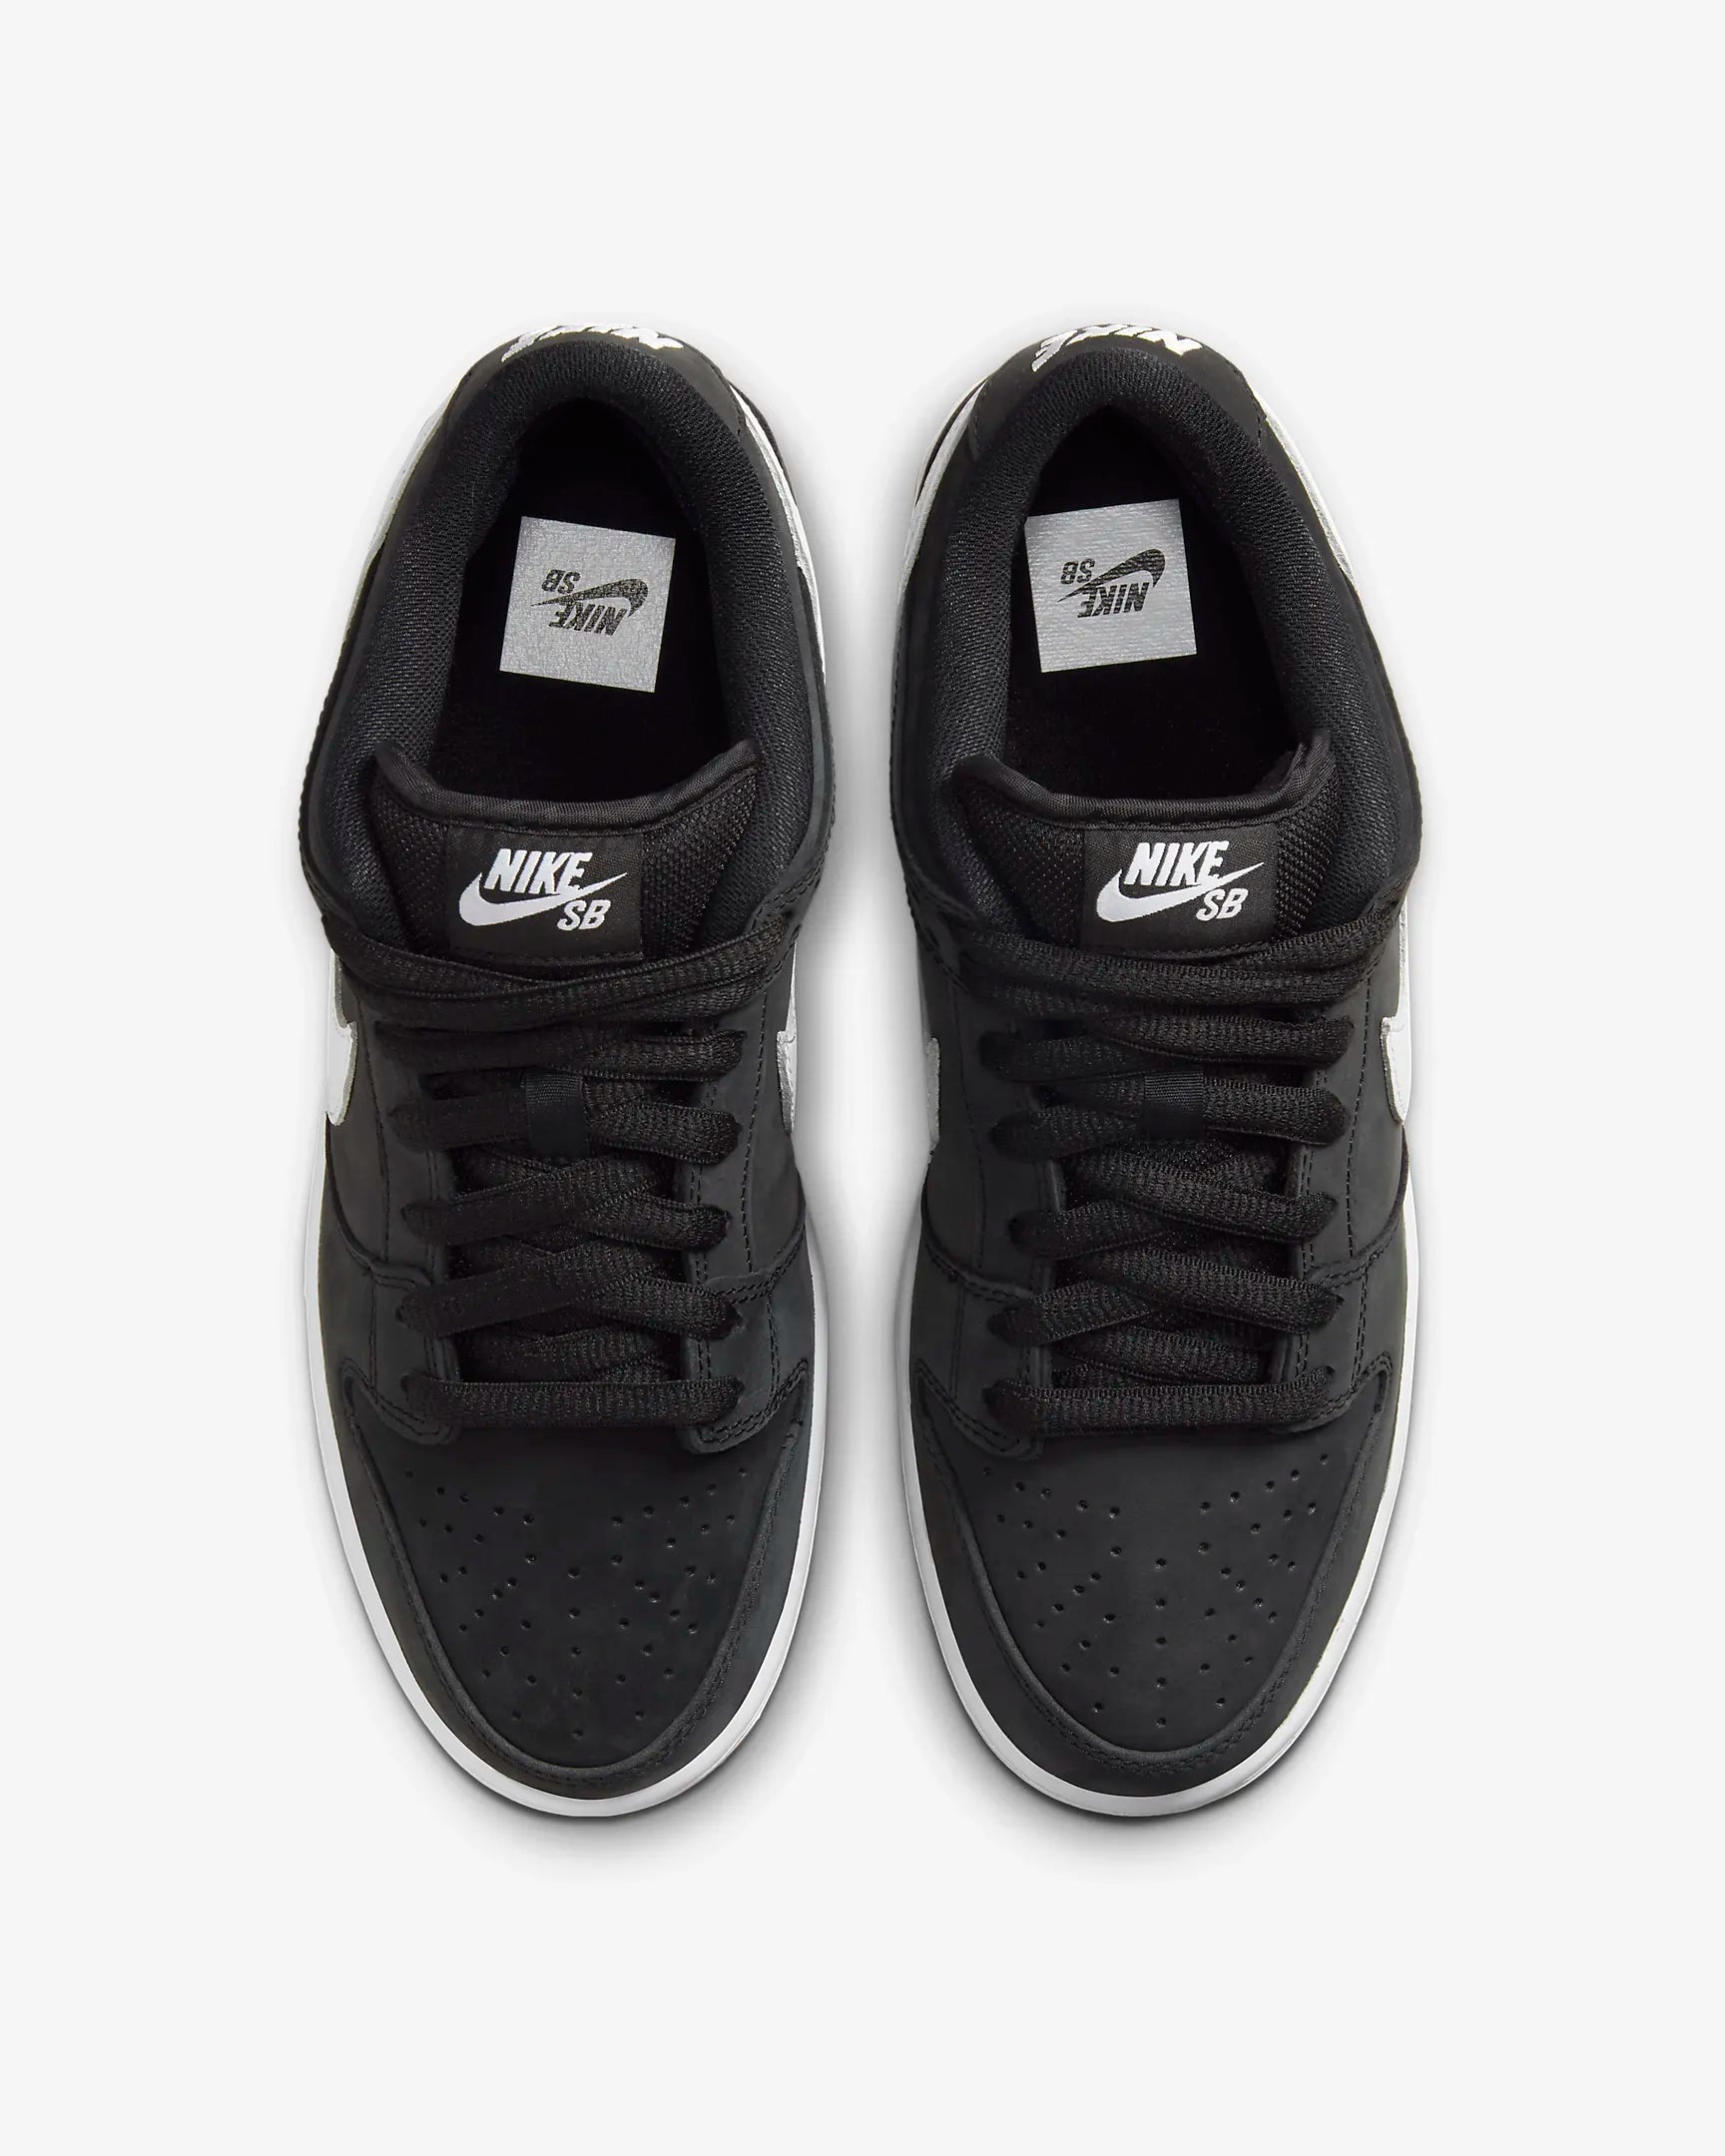 Nike SB Dunk Top-down View, photo from Nike website